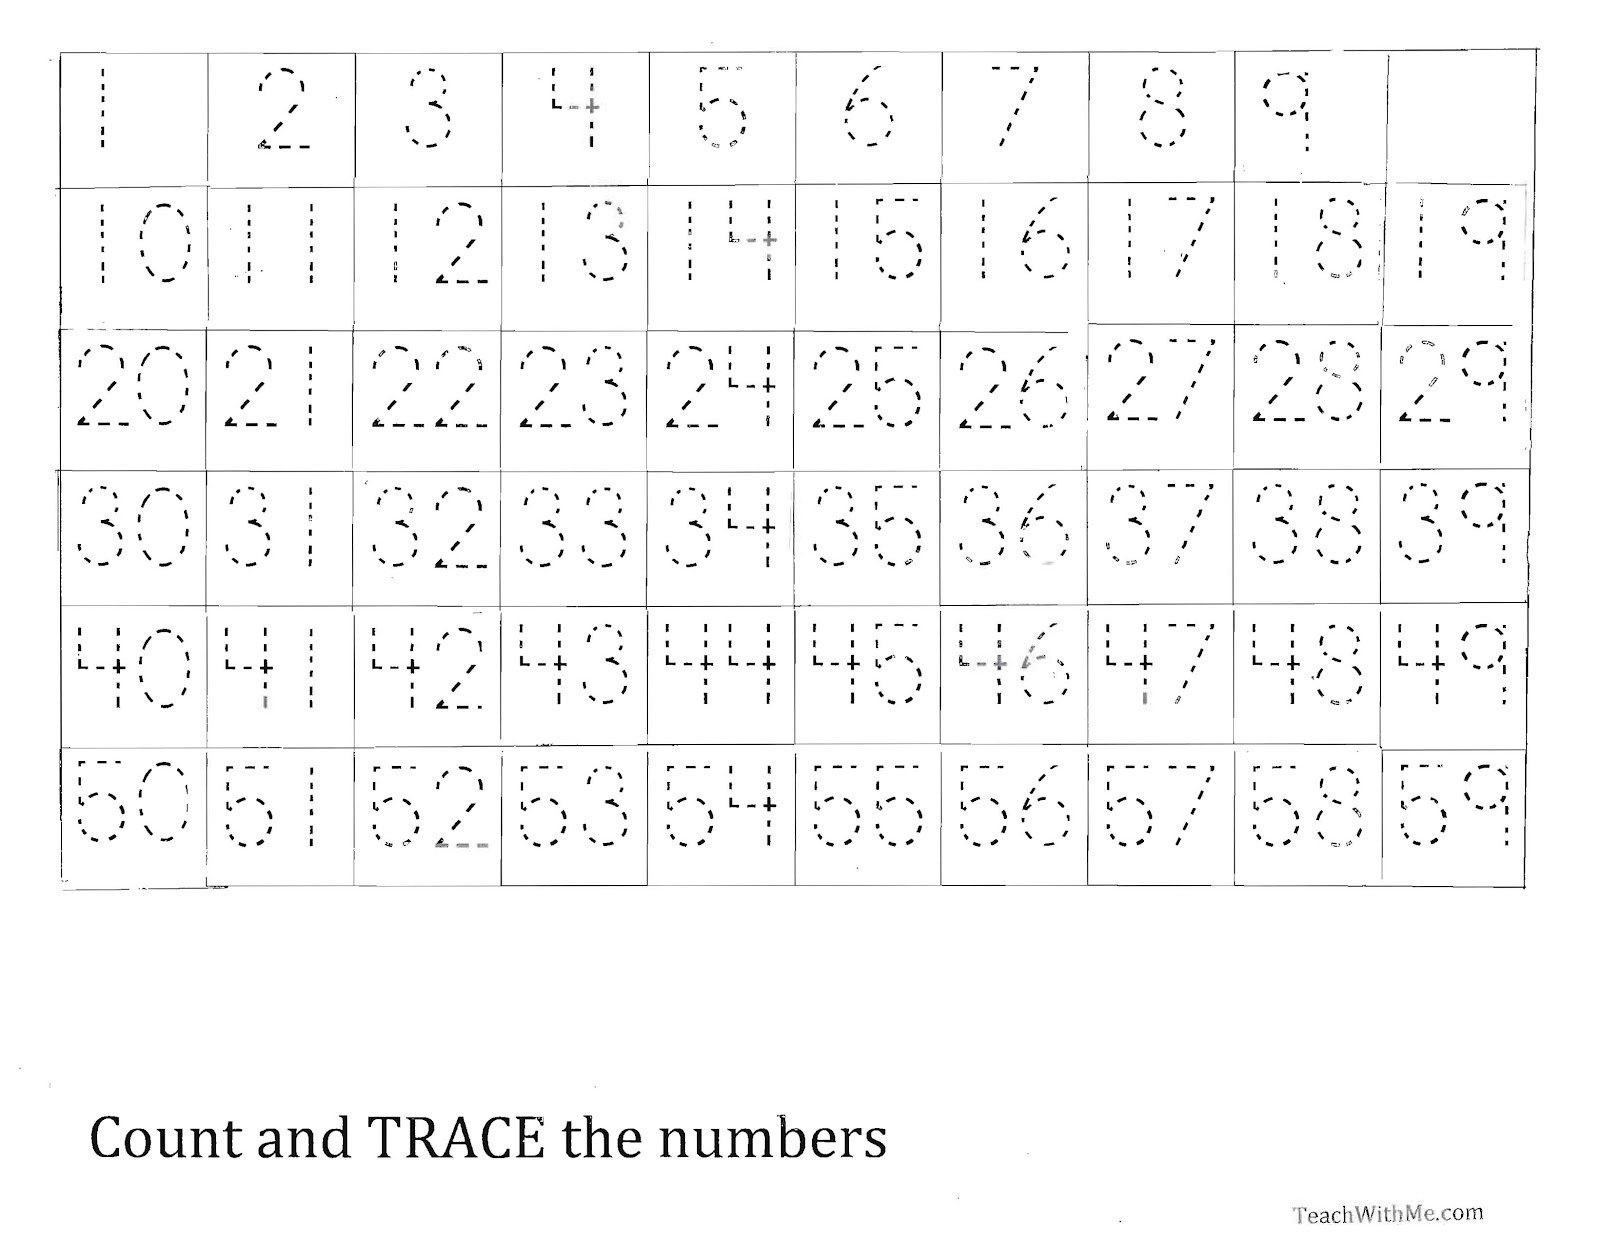 Free Math Worksheets Second Grade 2 Subtraction Subtract whole Tens From whole Tens Missing Number